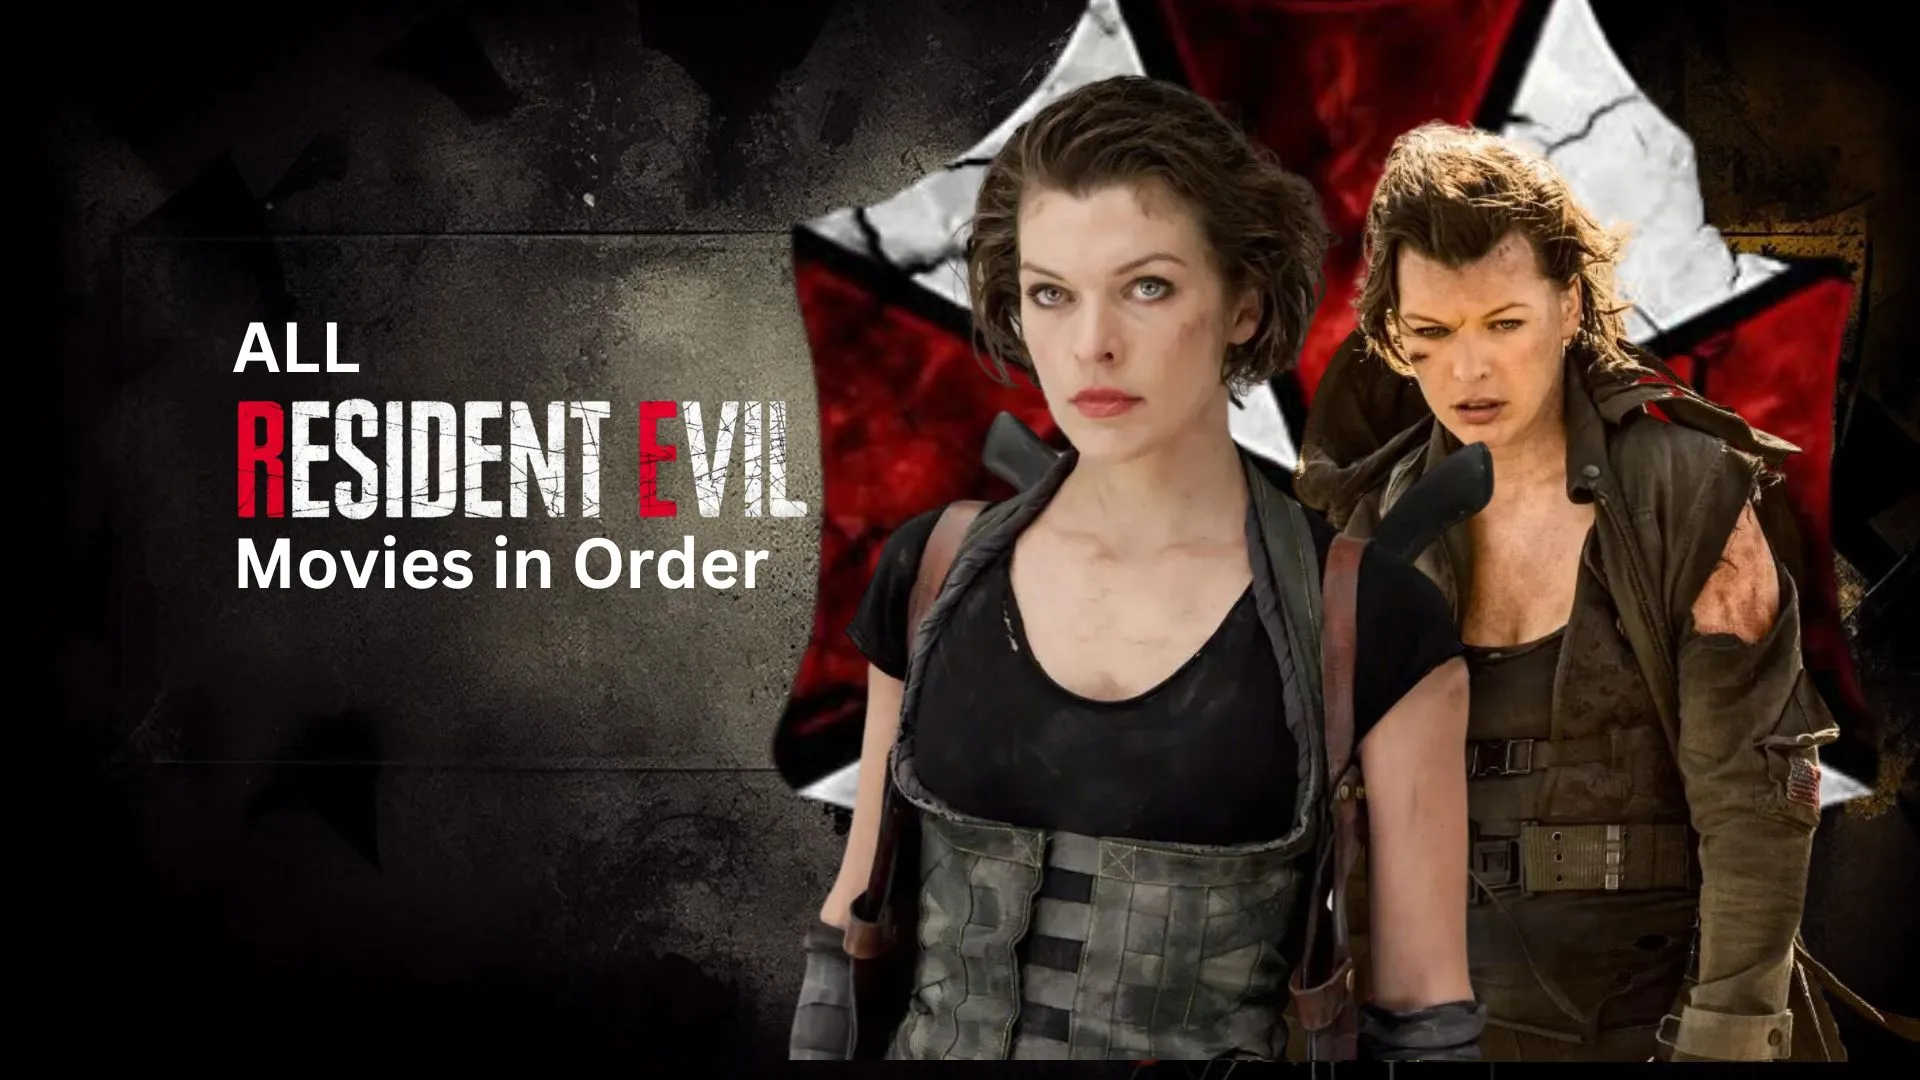 All Resident Evil Movies in Order